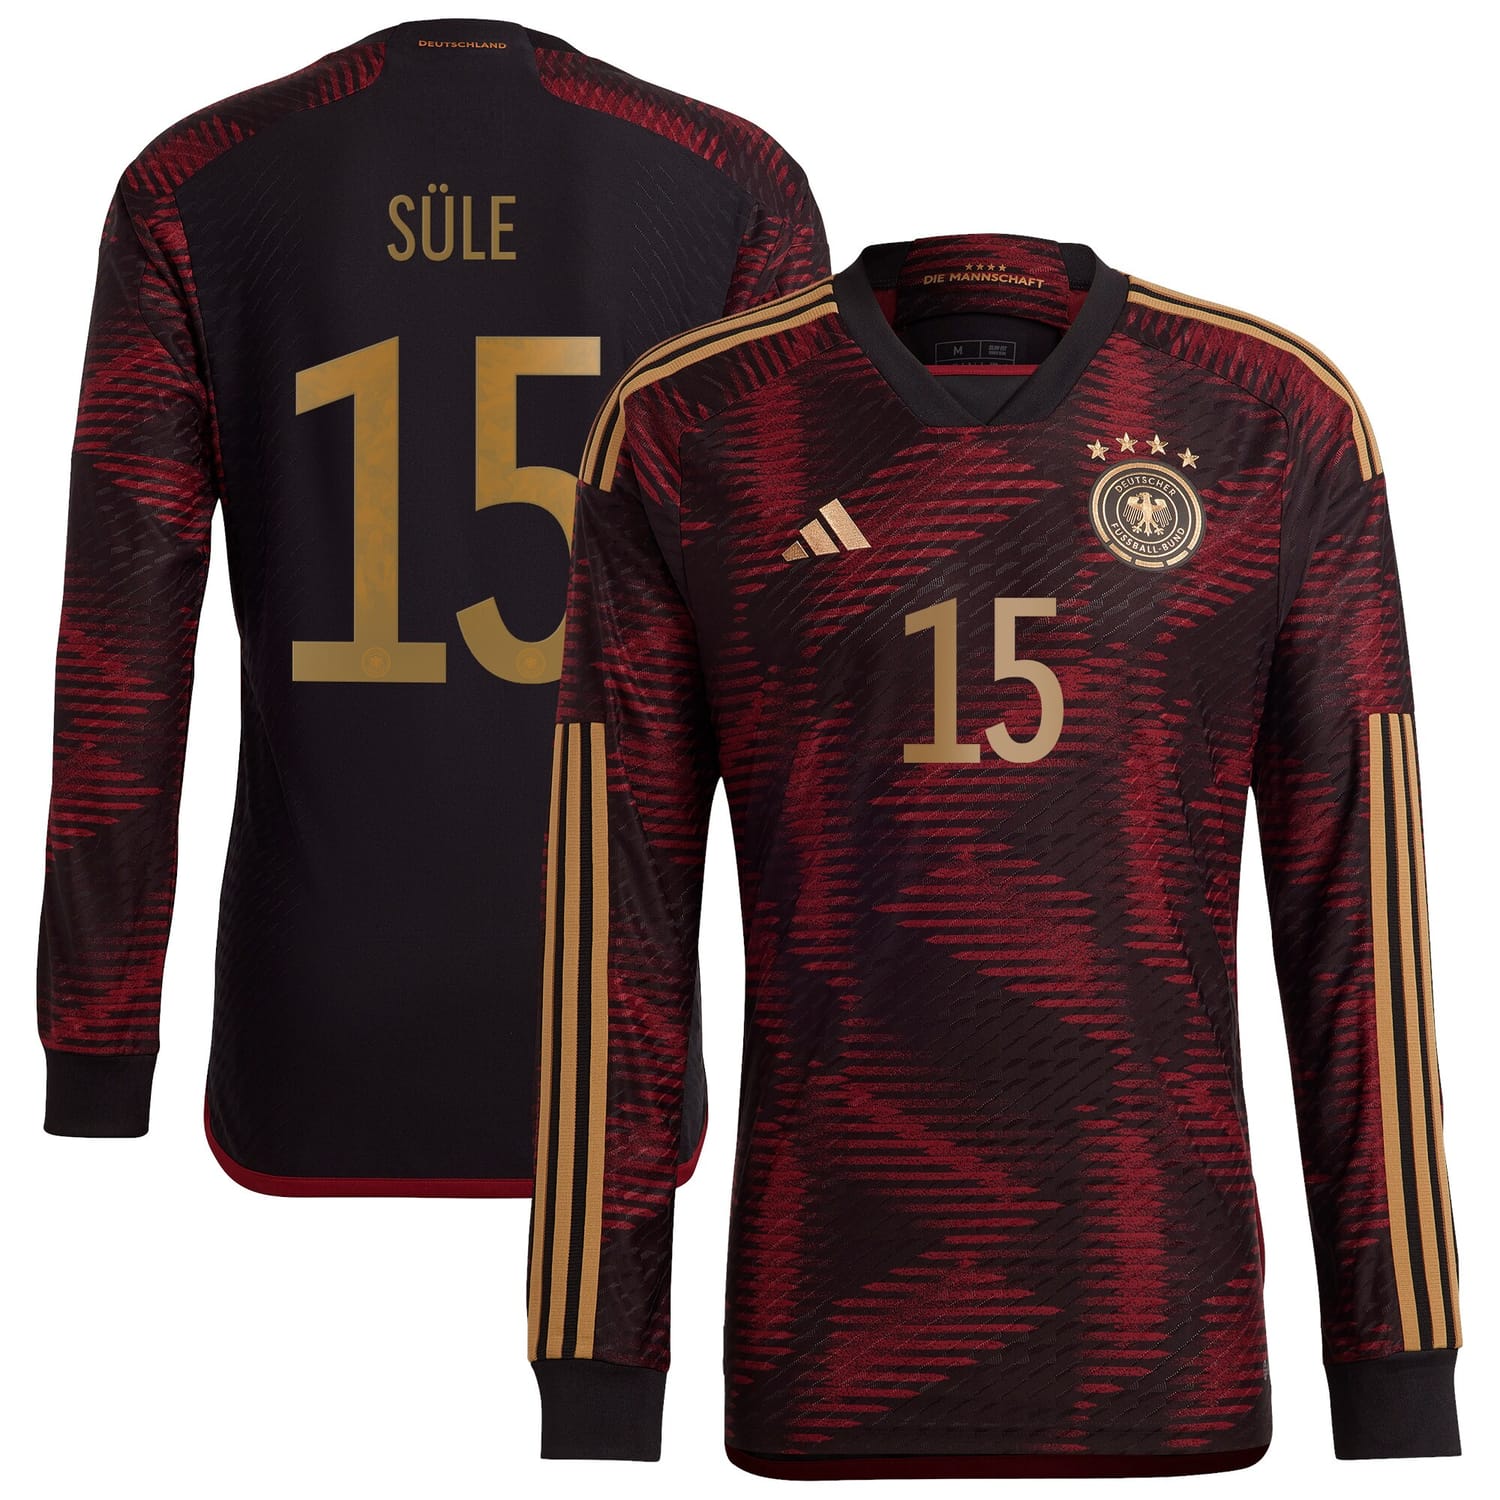 Germany National Team Away Authentic Jersey Shirt Long Sleeve player Niklas Süle 15 printing for Men